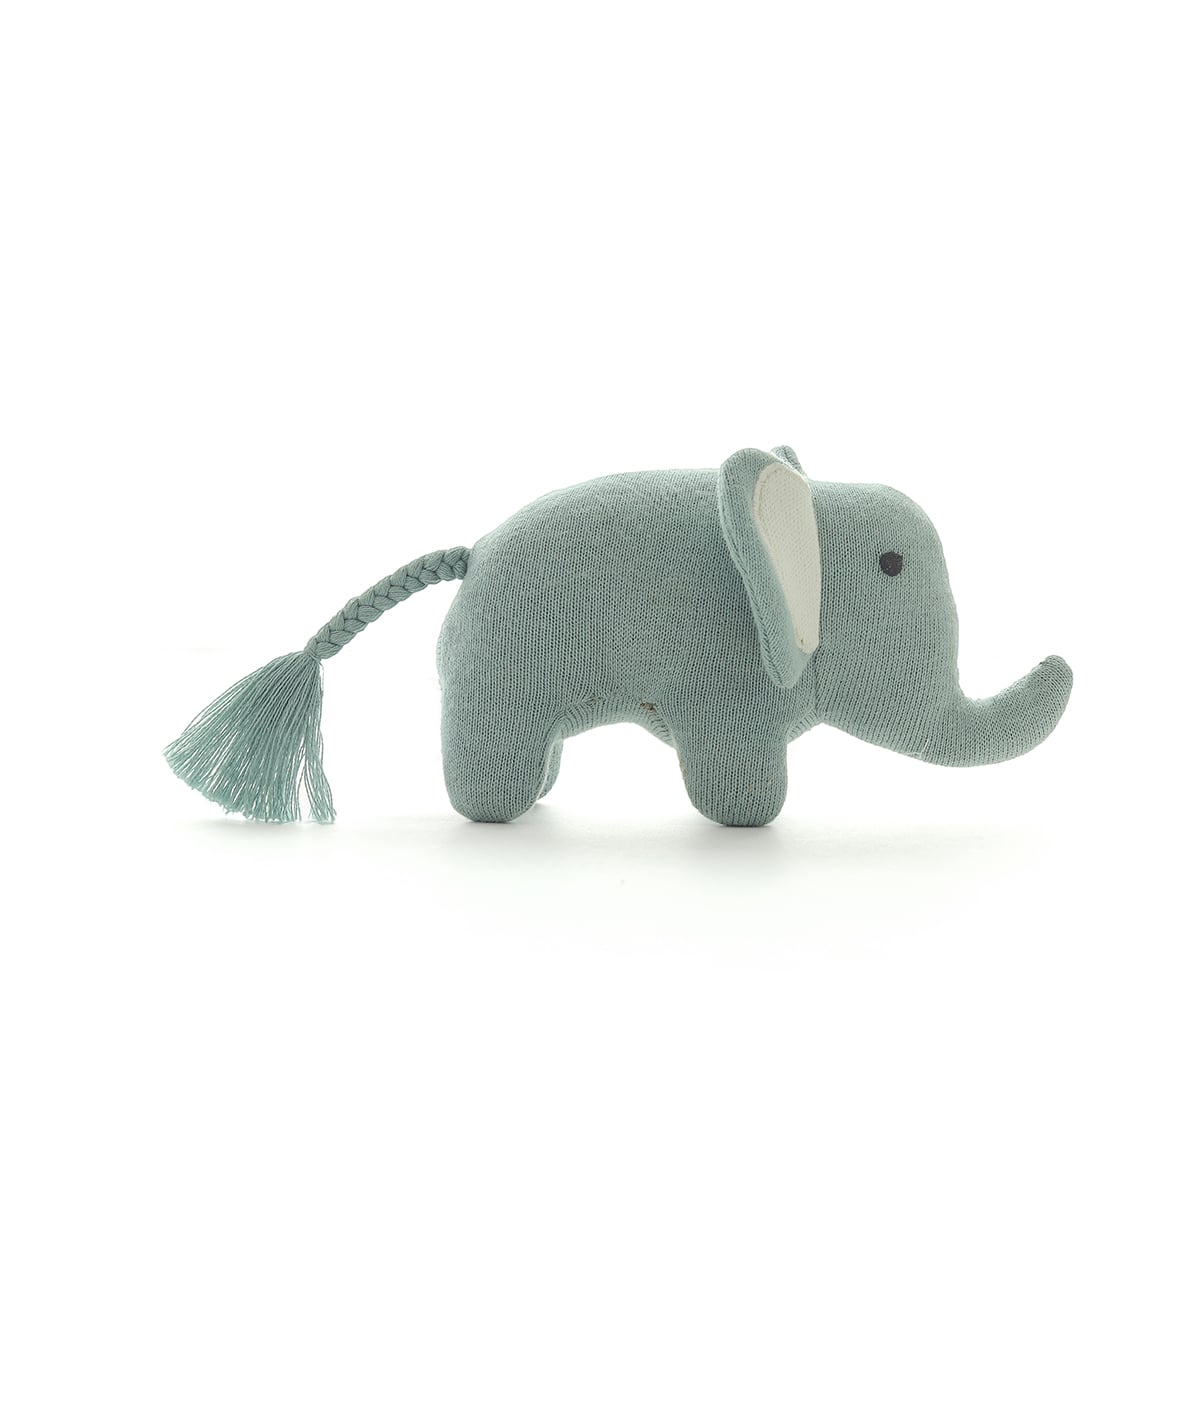 Harris the Elephant- Cotton Knitted Stuffed Soft Rattle Toy (Dull Blue)